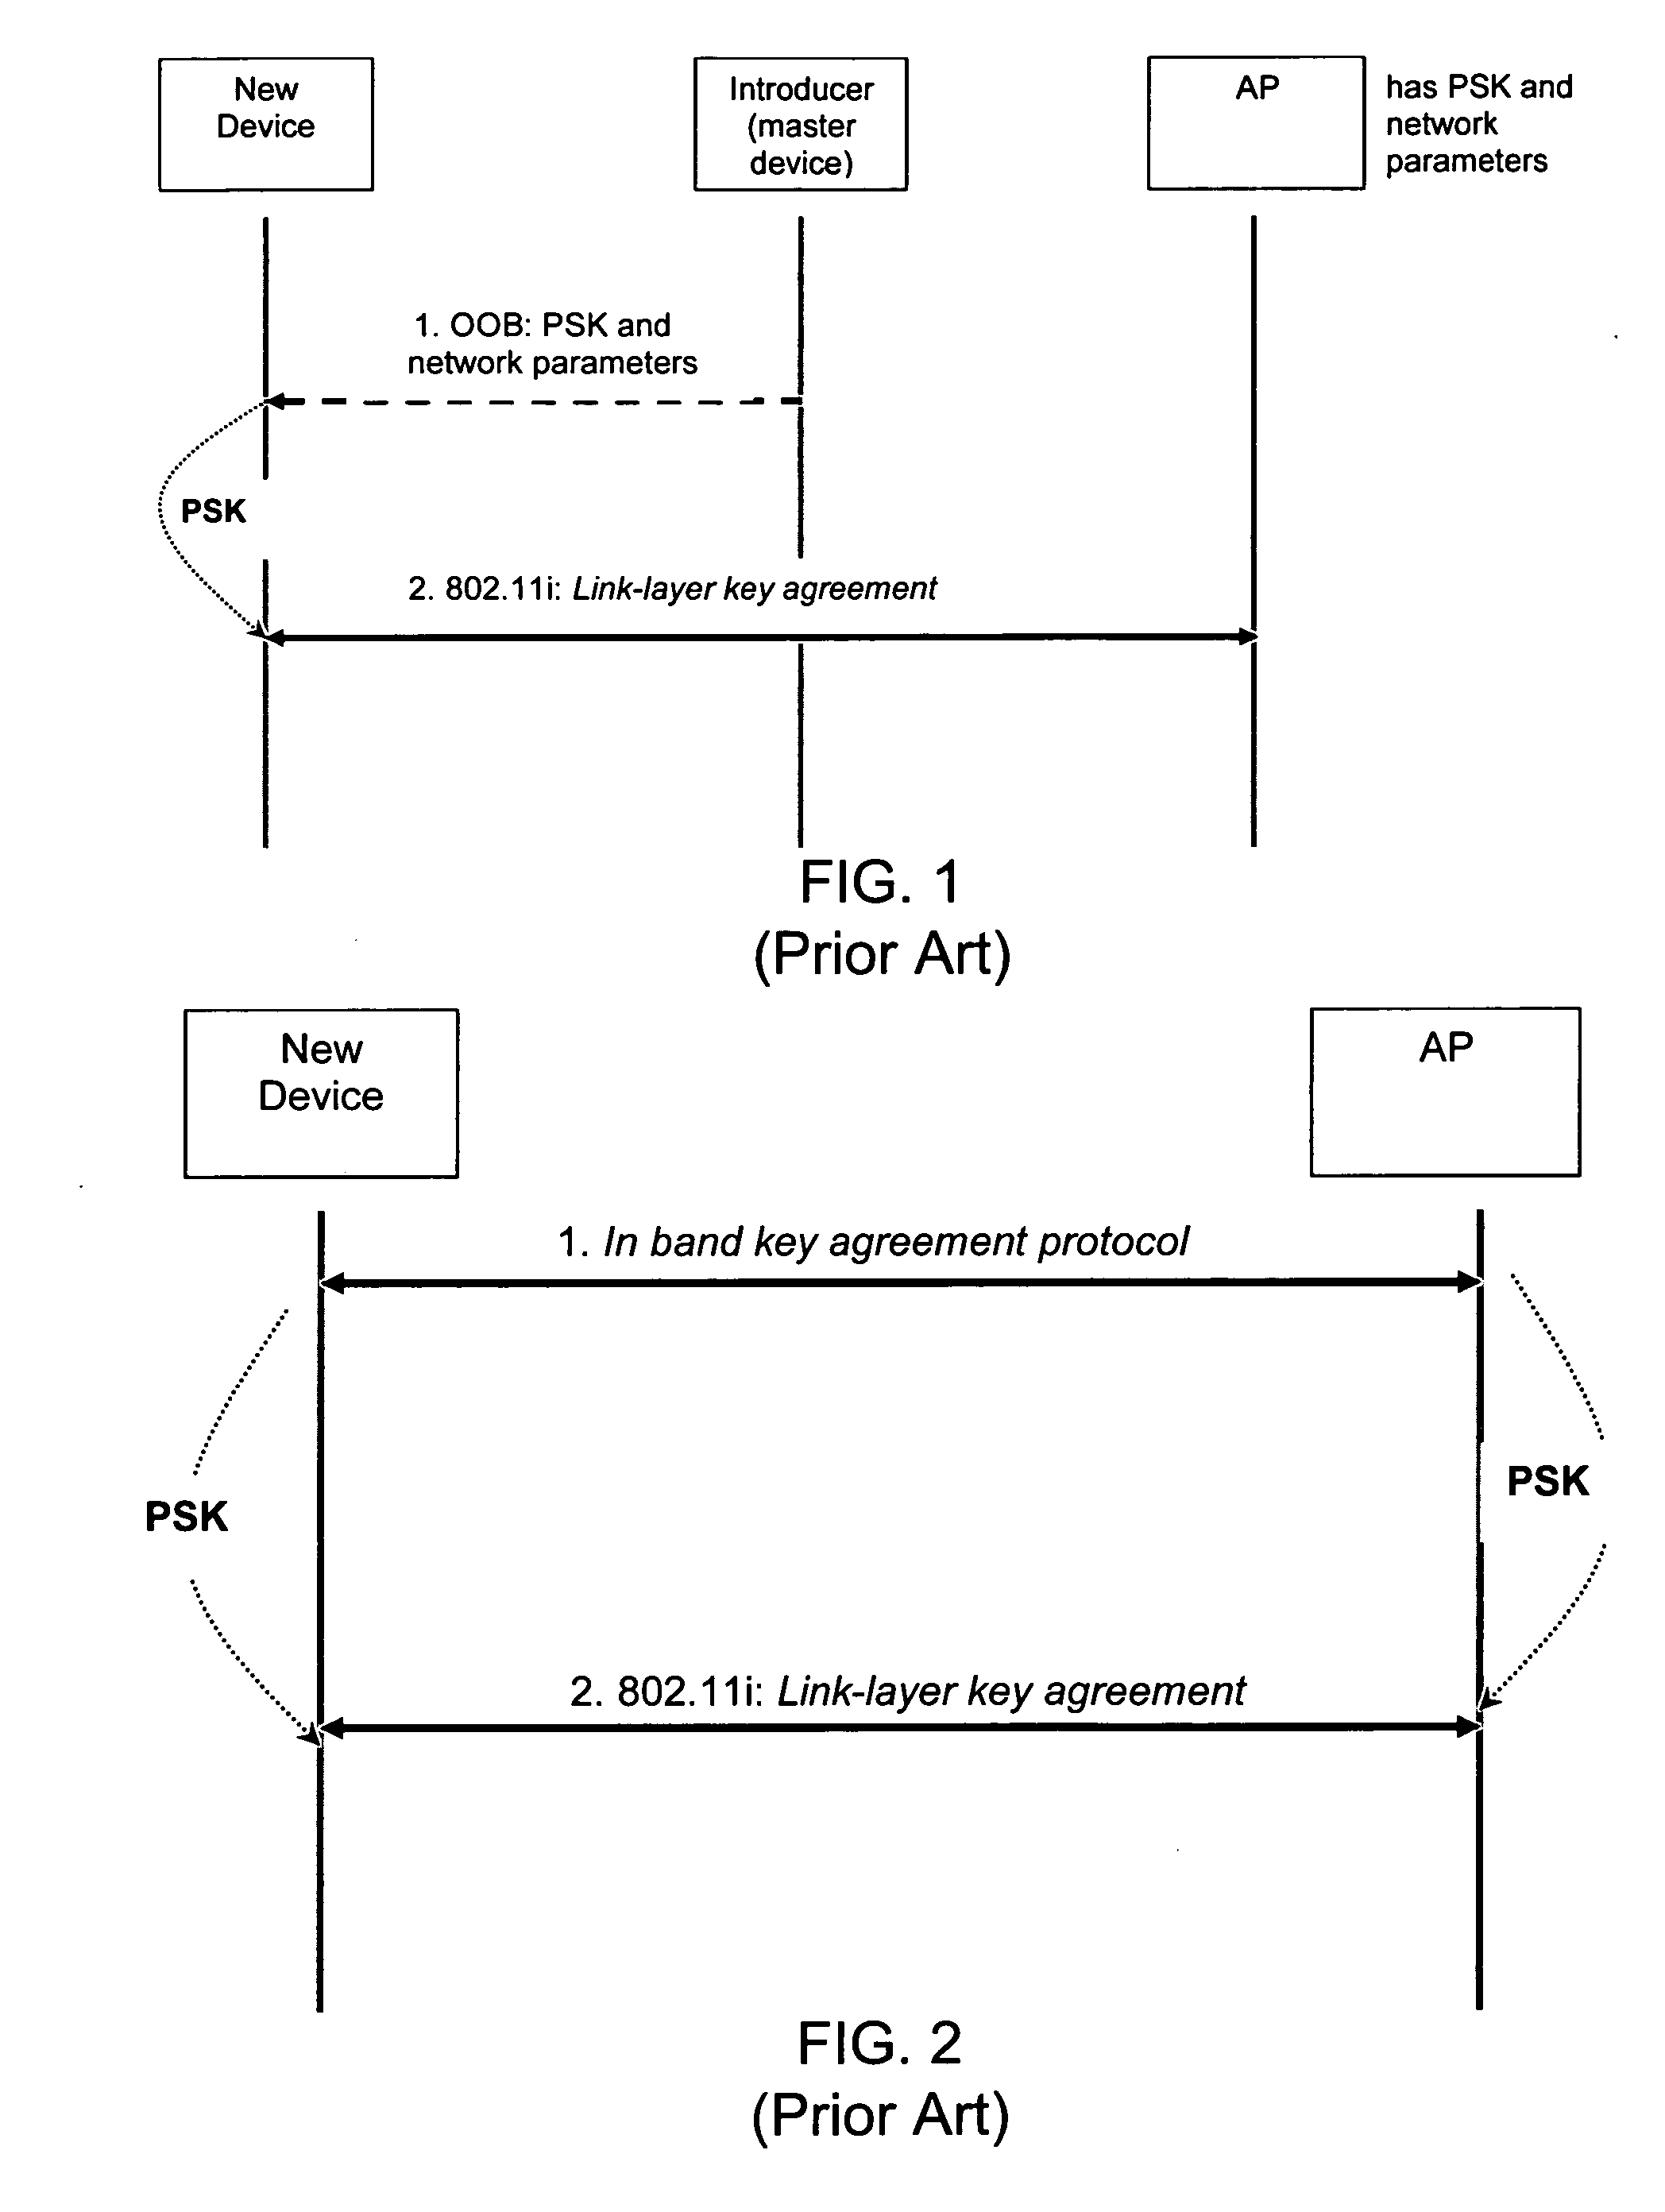 Administration of wireless local area networks